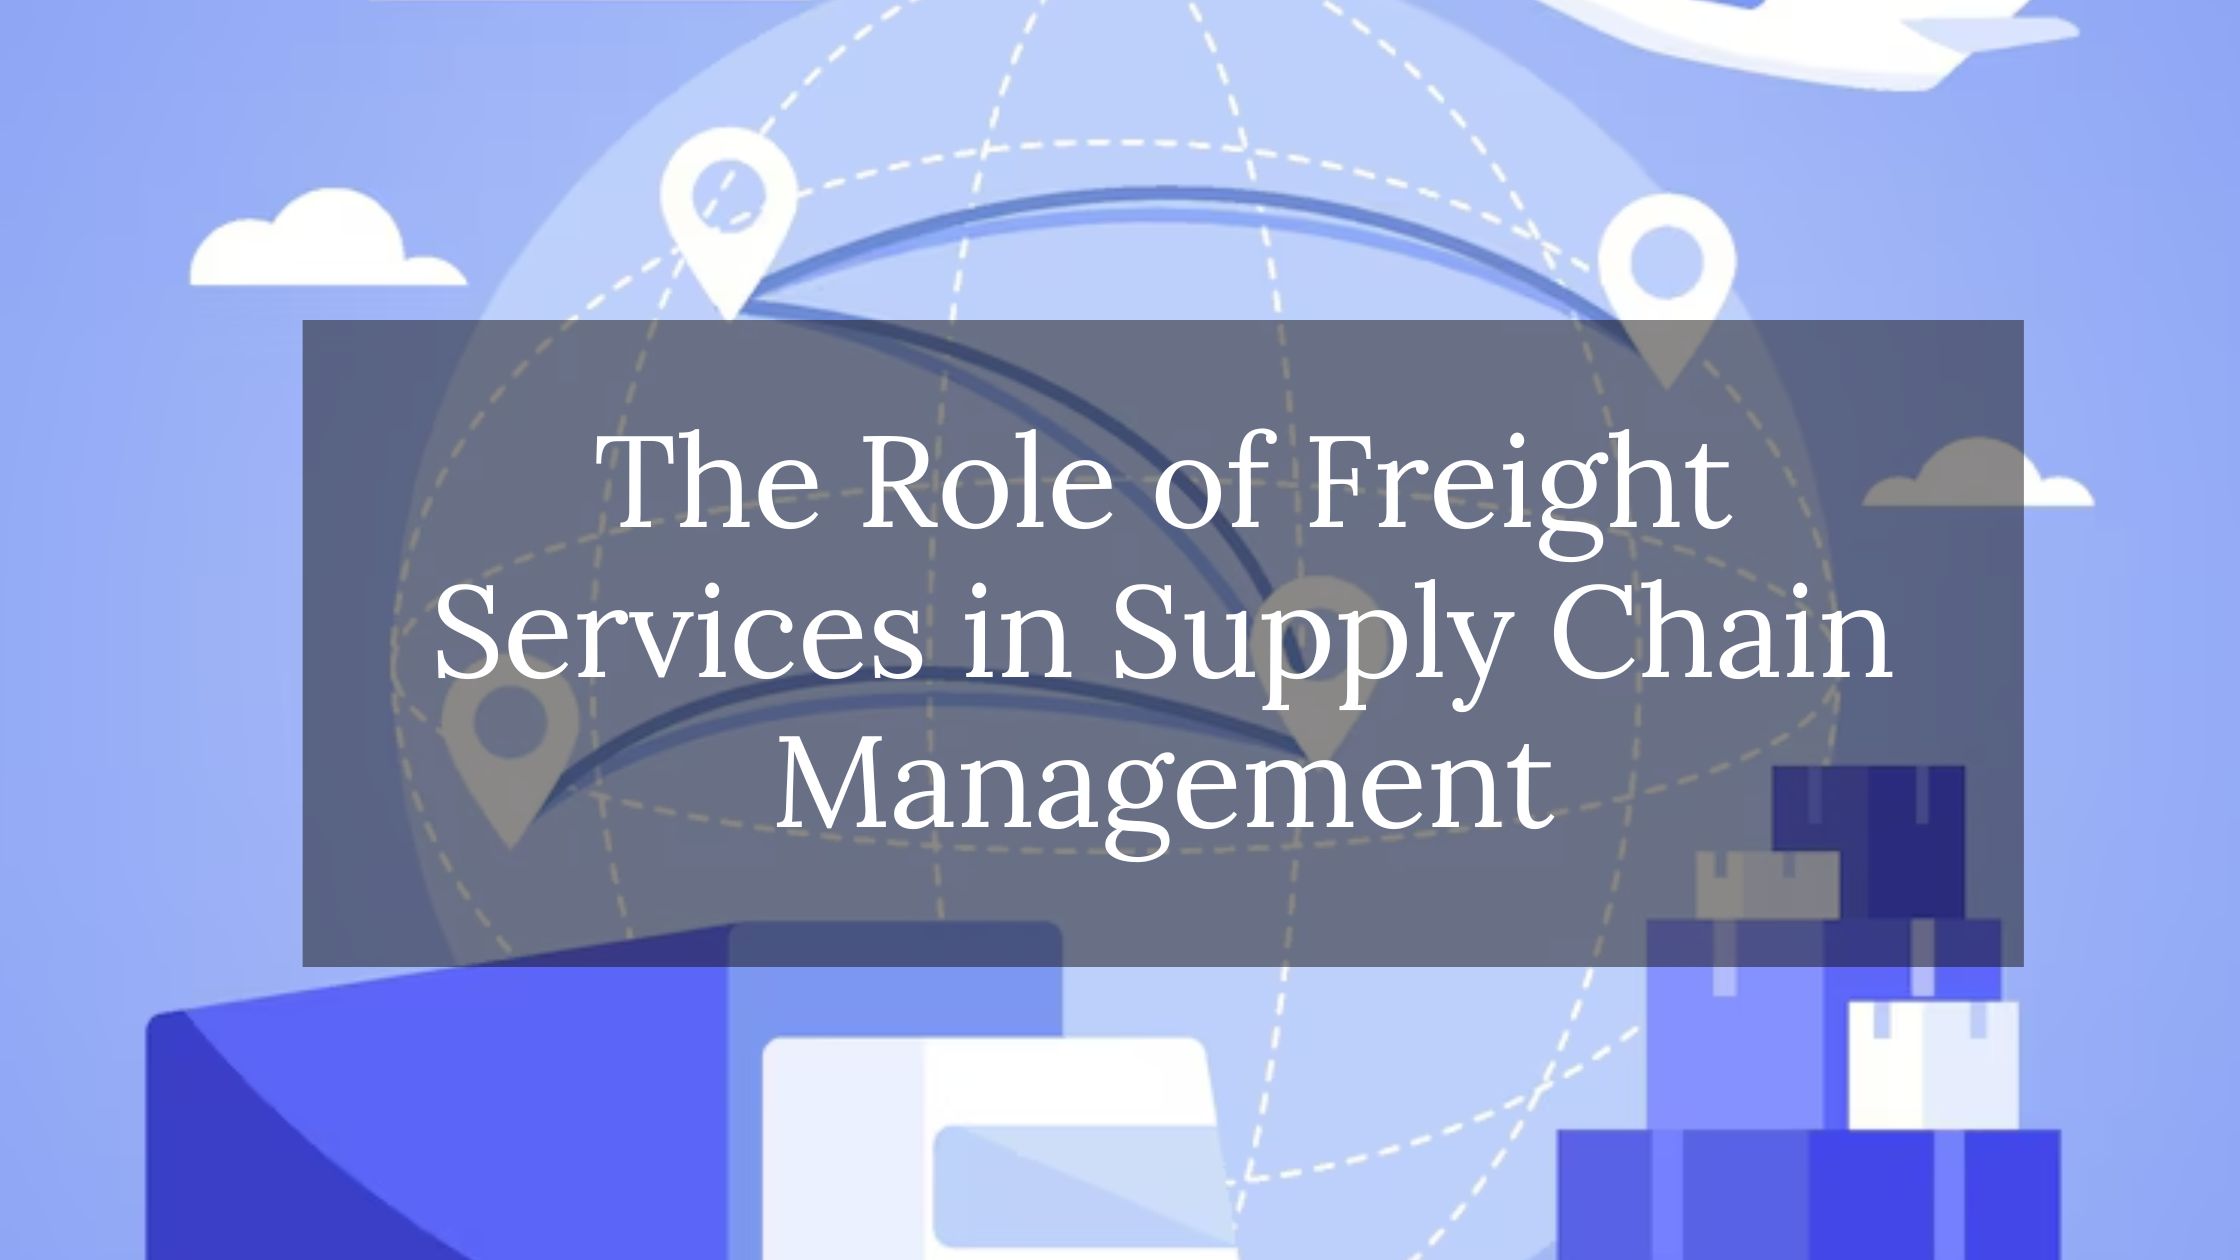 The Role of Freight Services in Supply Chain Management